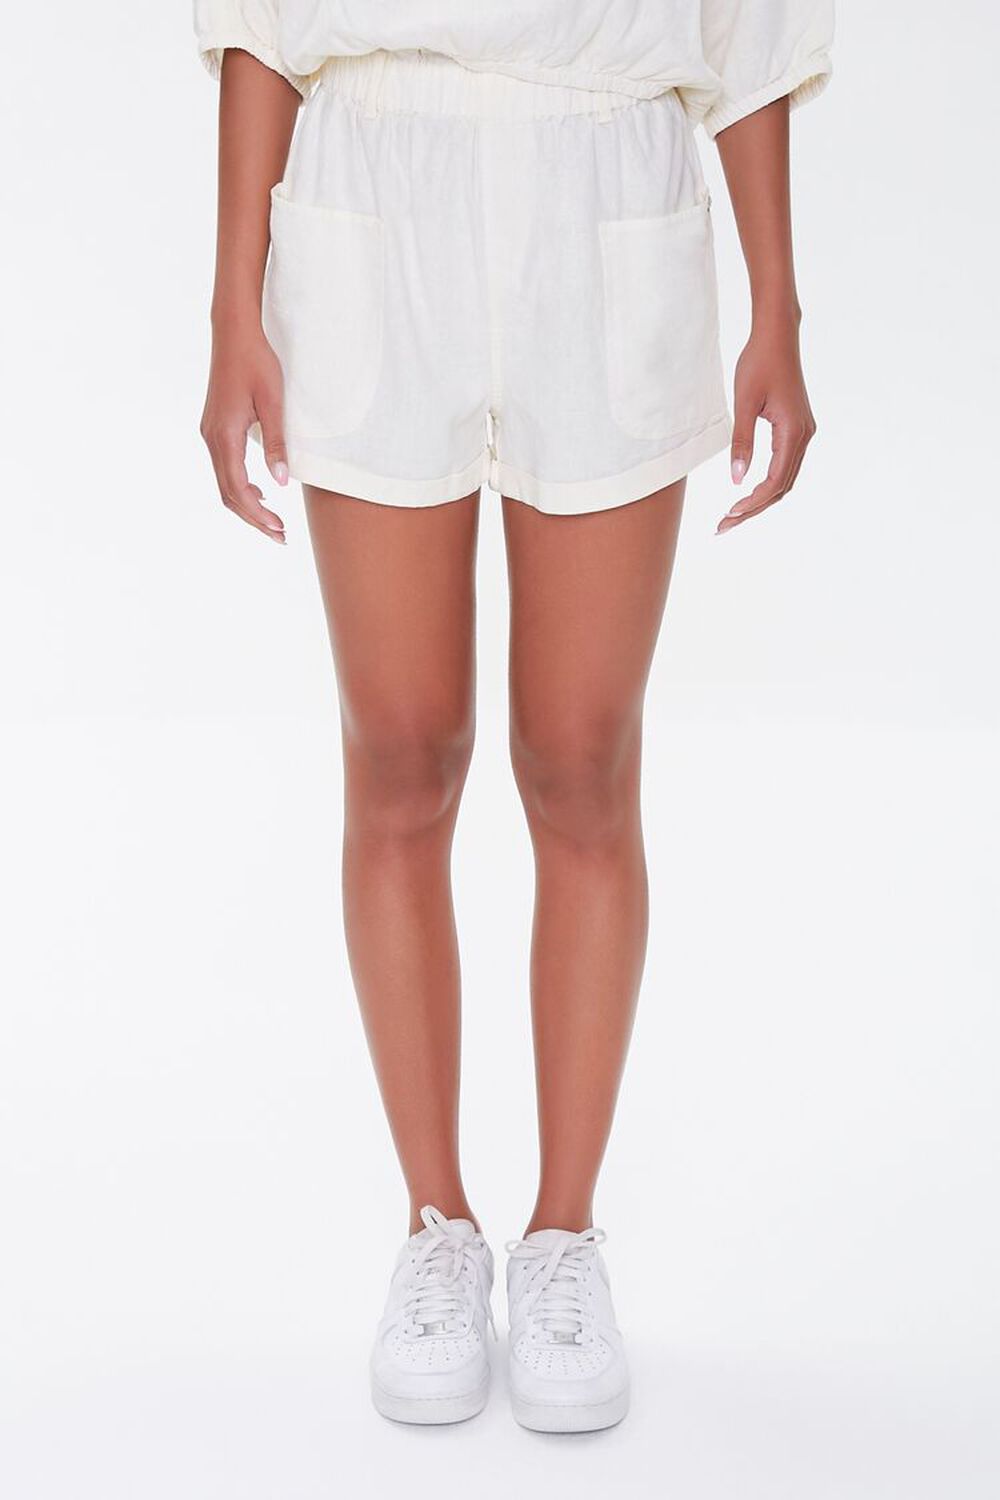 WHITE Kendall & Kylie Linen-Blend Shorts, image 2